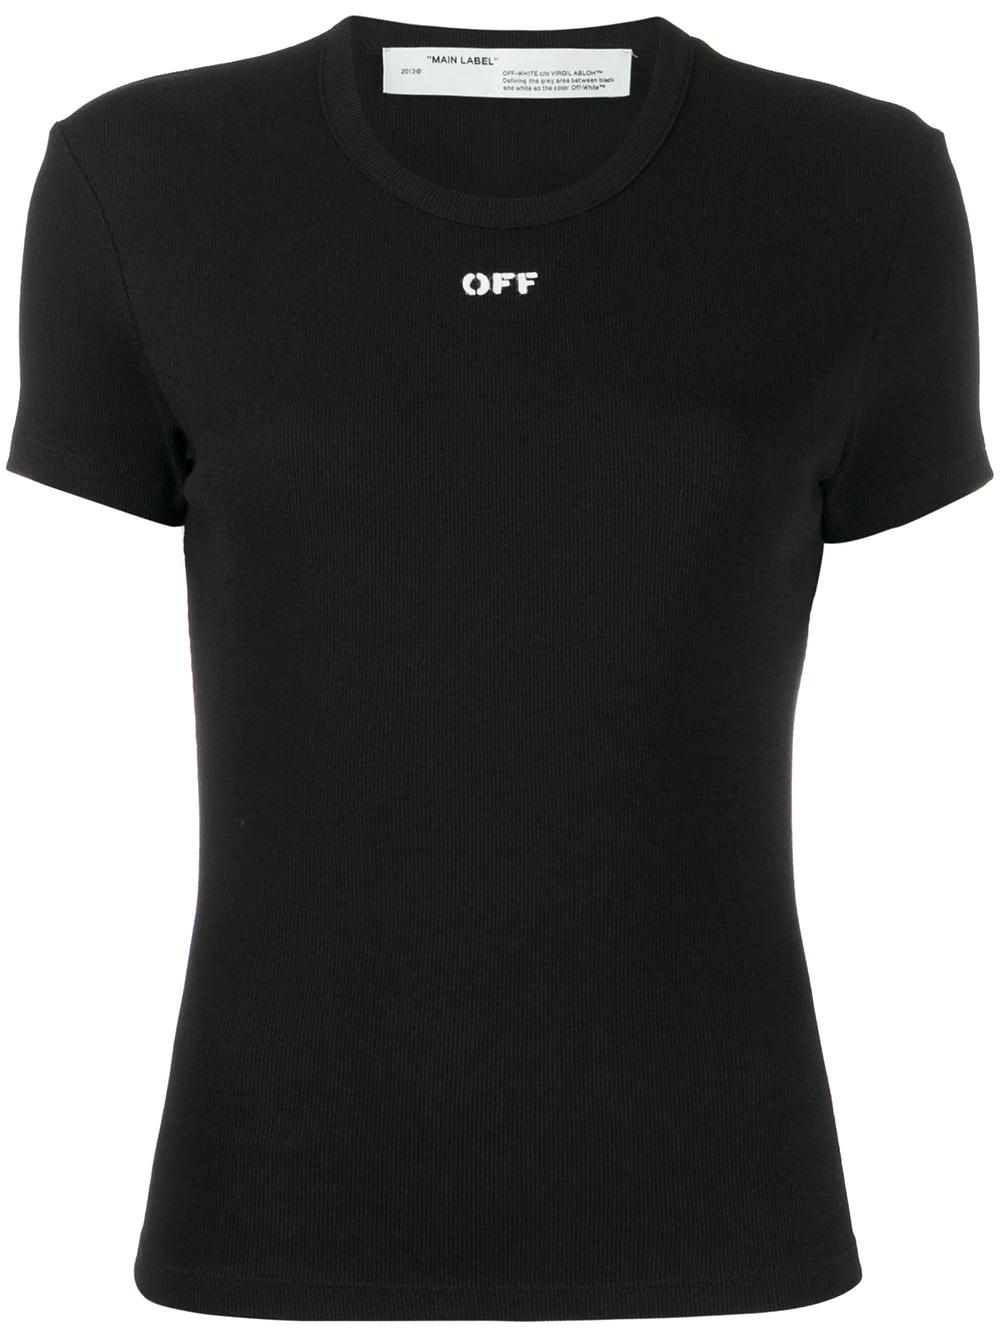 Off-White c/o Virgil Abloh Ladies Black Fitted Short Sleeved T-shirt - Lyst